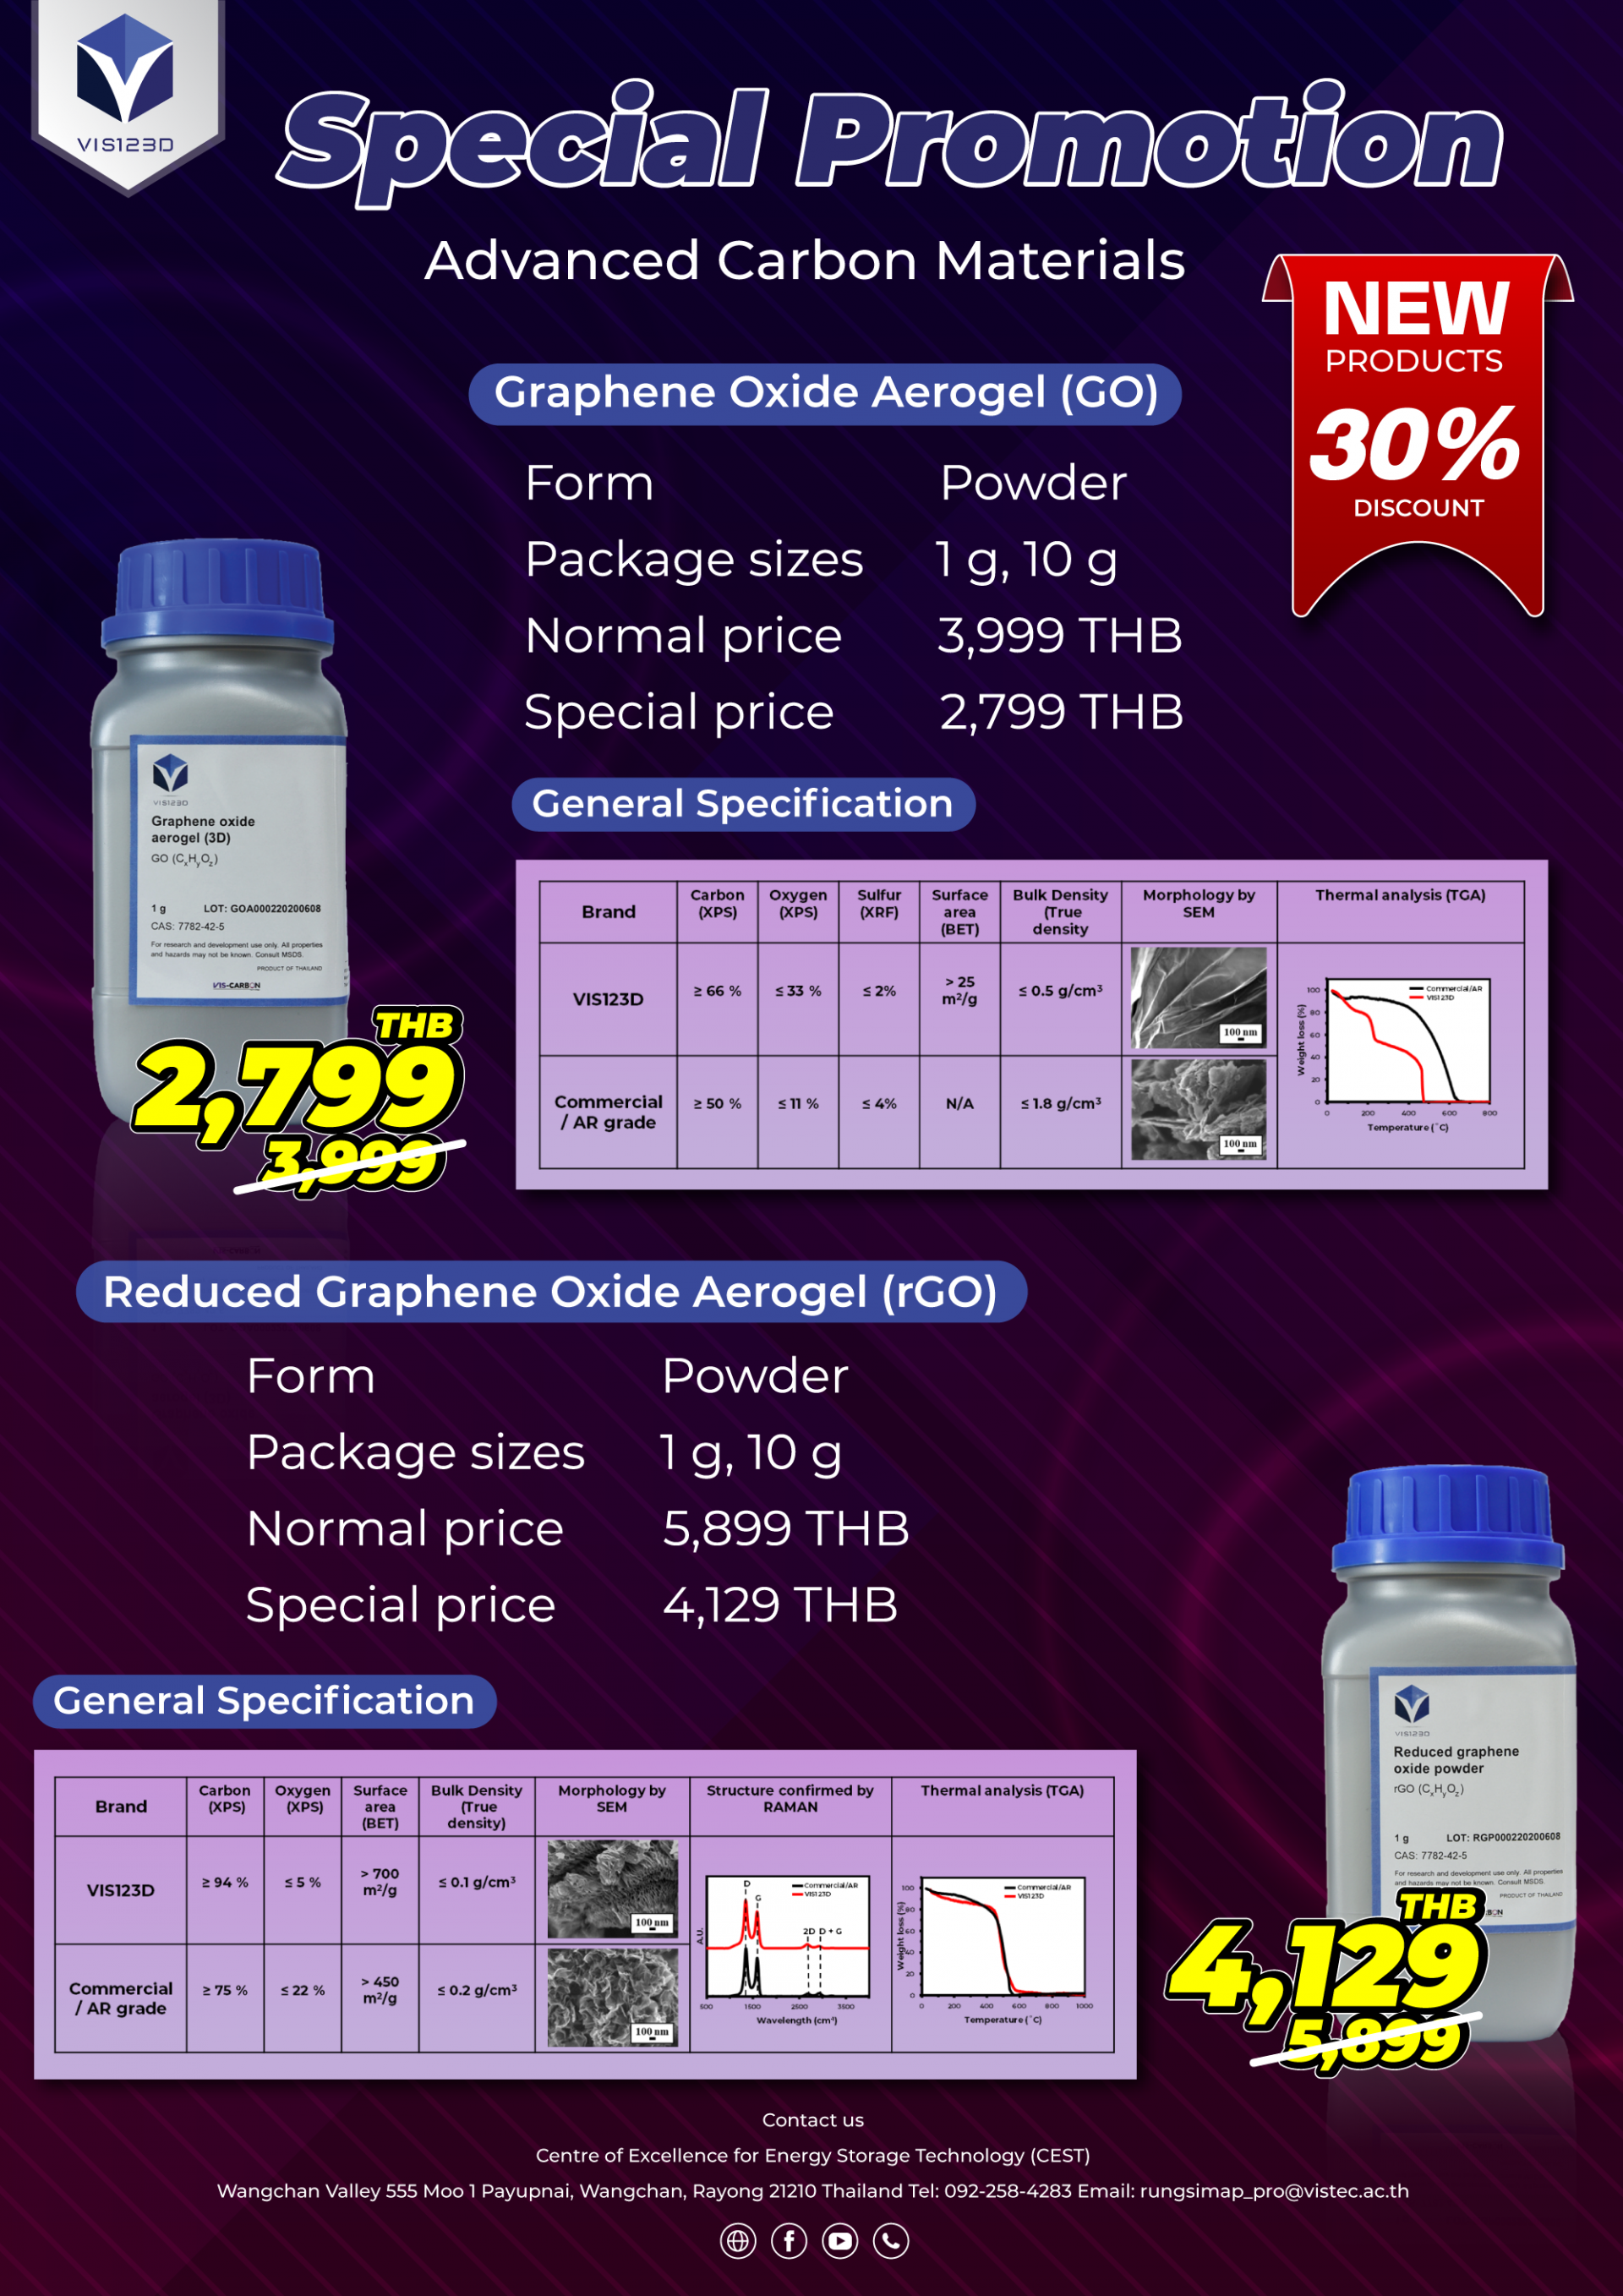 Special Promotion Advanced Carbon Materials